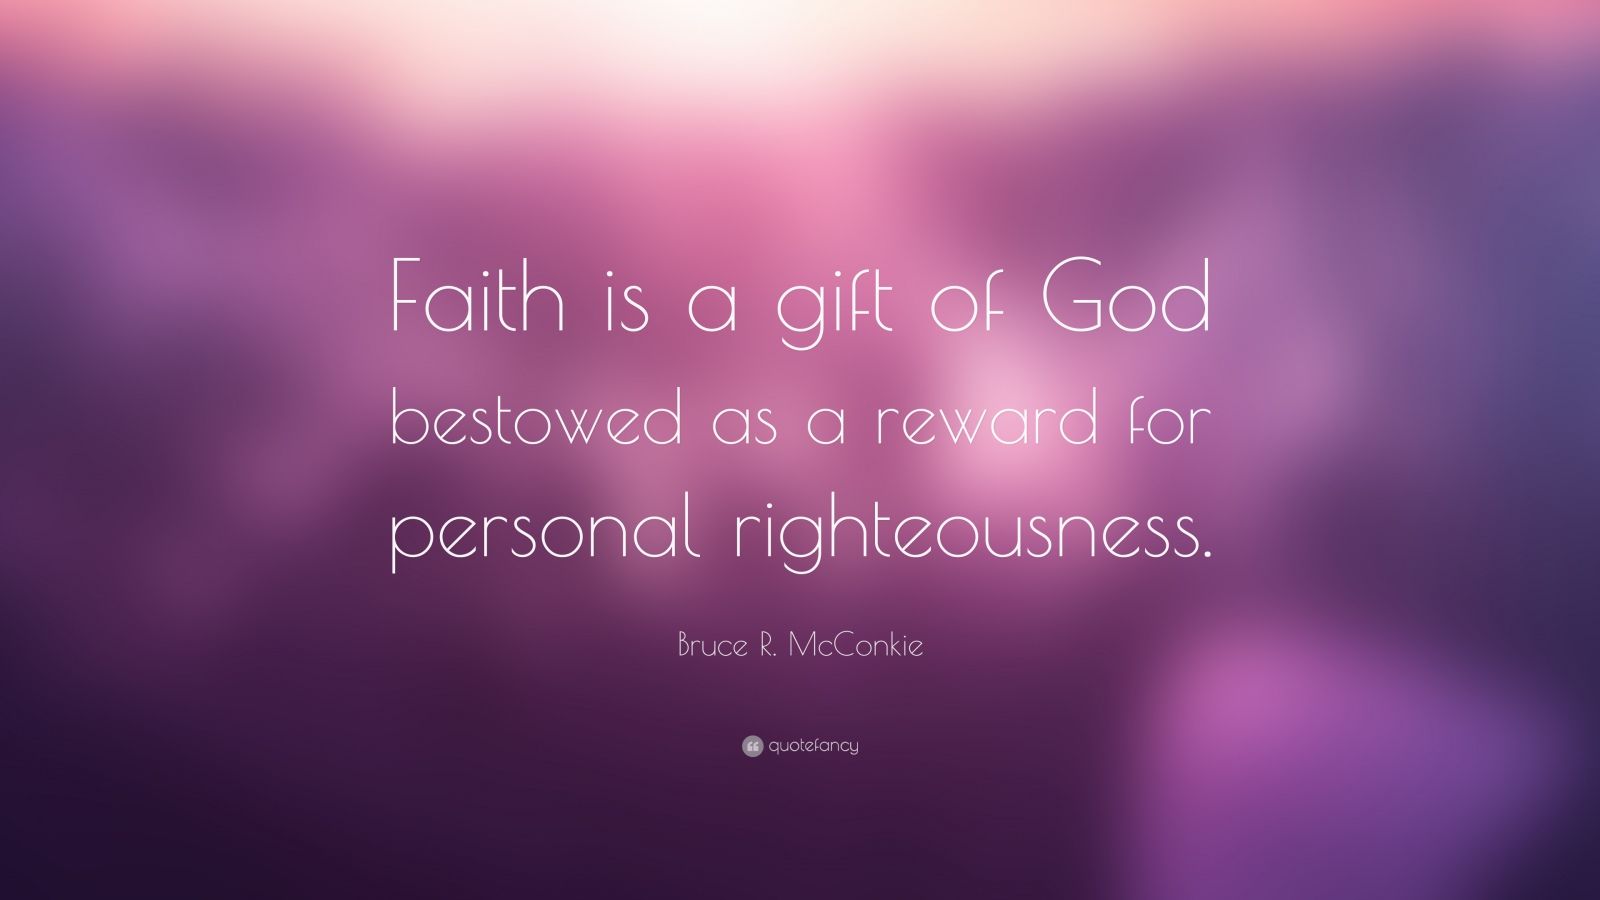 Bruce R. McConkie Quote “Faith is a gift of God bestowed